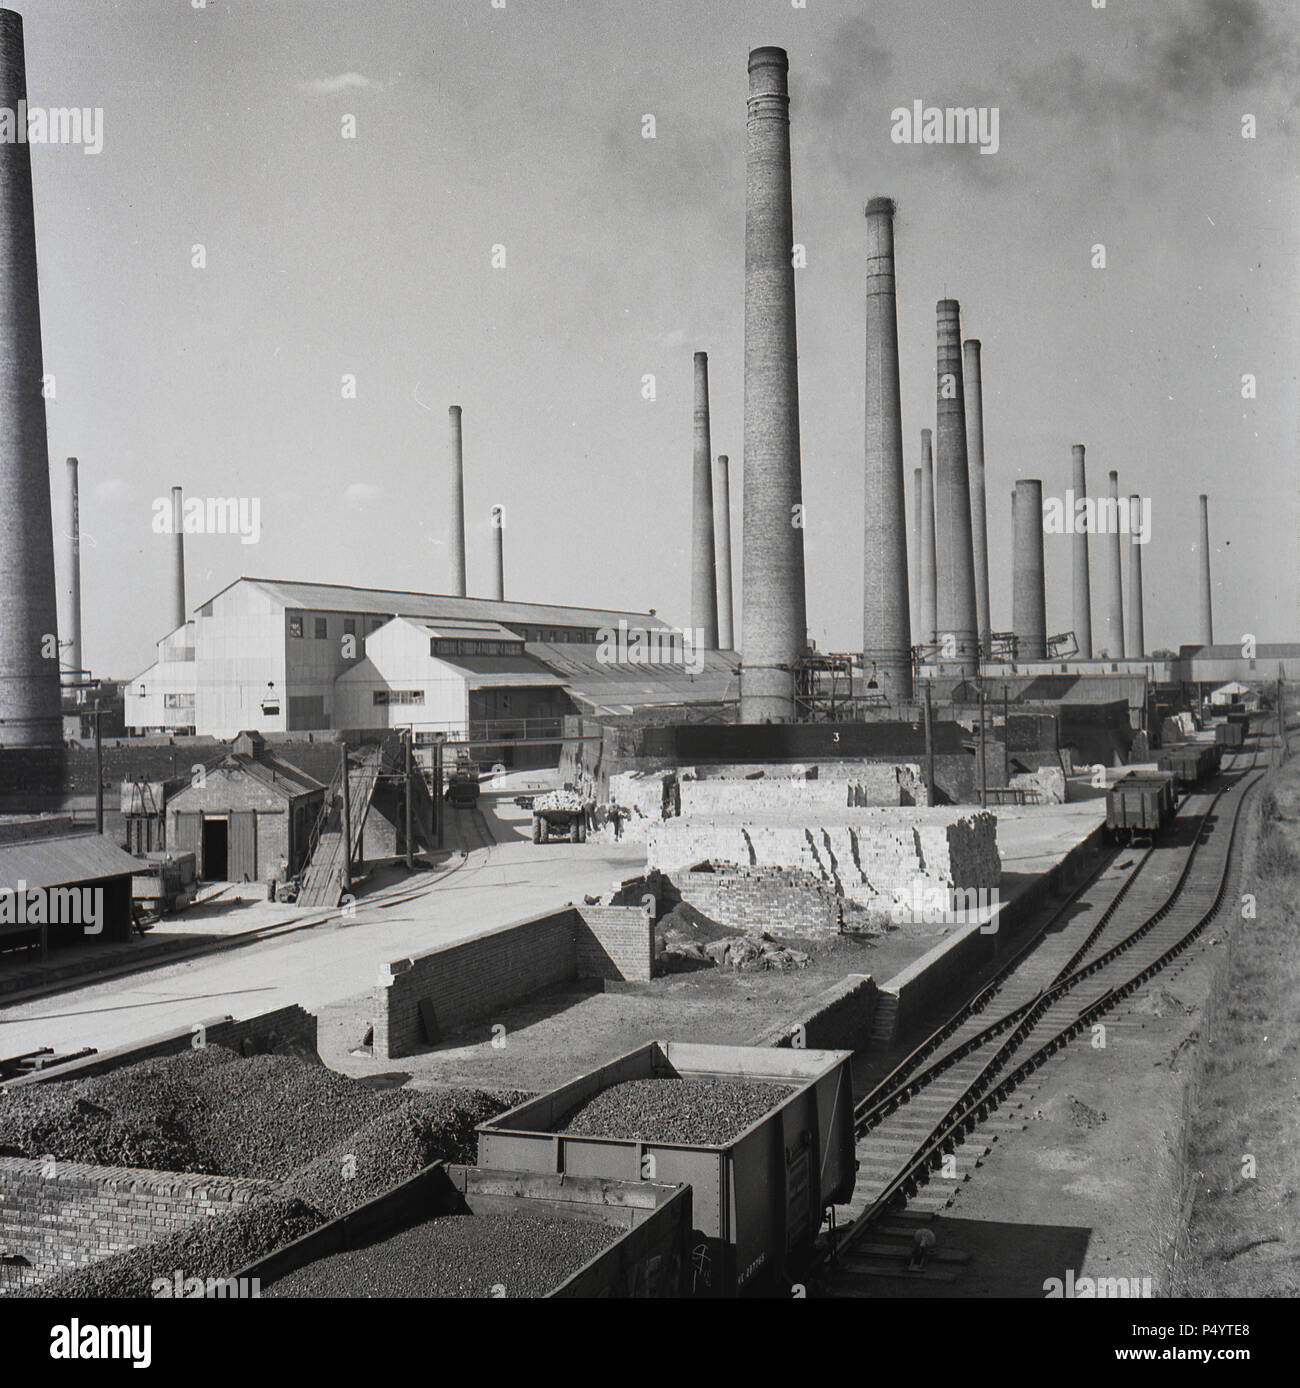 1950s, historical, Exterior view over a part of the giant brickworks of the London Brick Company at Stewartby, Bedfordshire, England, UK, showing the mass of chimneys which ventilated the numerous kilns that fired the bricks. There were as many as 162 chimneys at the site. - A British company, the London Brick Company was the largest brick producer in the world at this time, mining 'Oxford Clay', the organic mudstone or mineral that underlied parts of the South of England and which was the raw material for the famous London Brick. Stock Photo